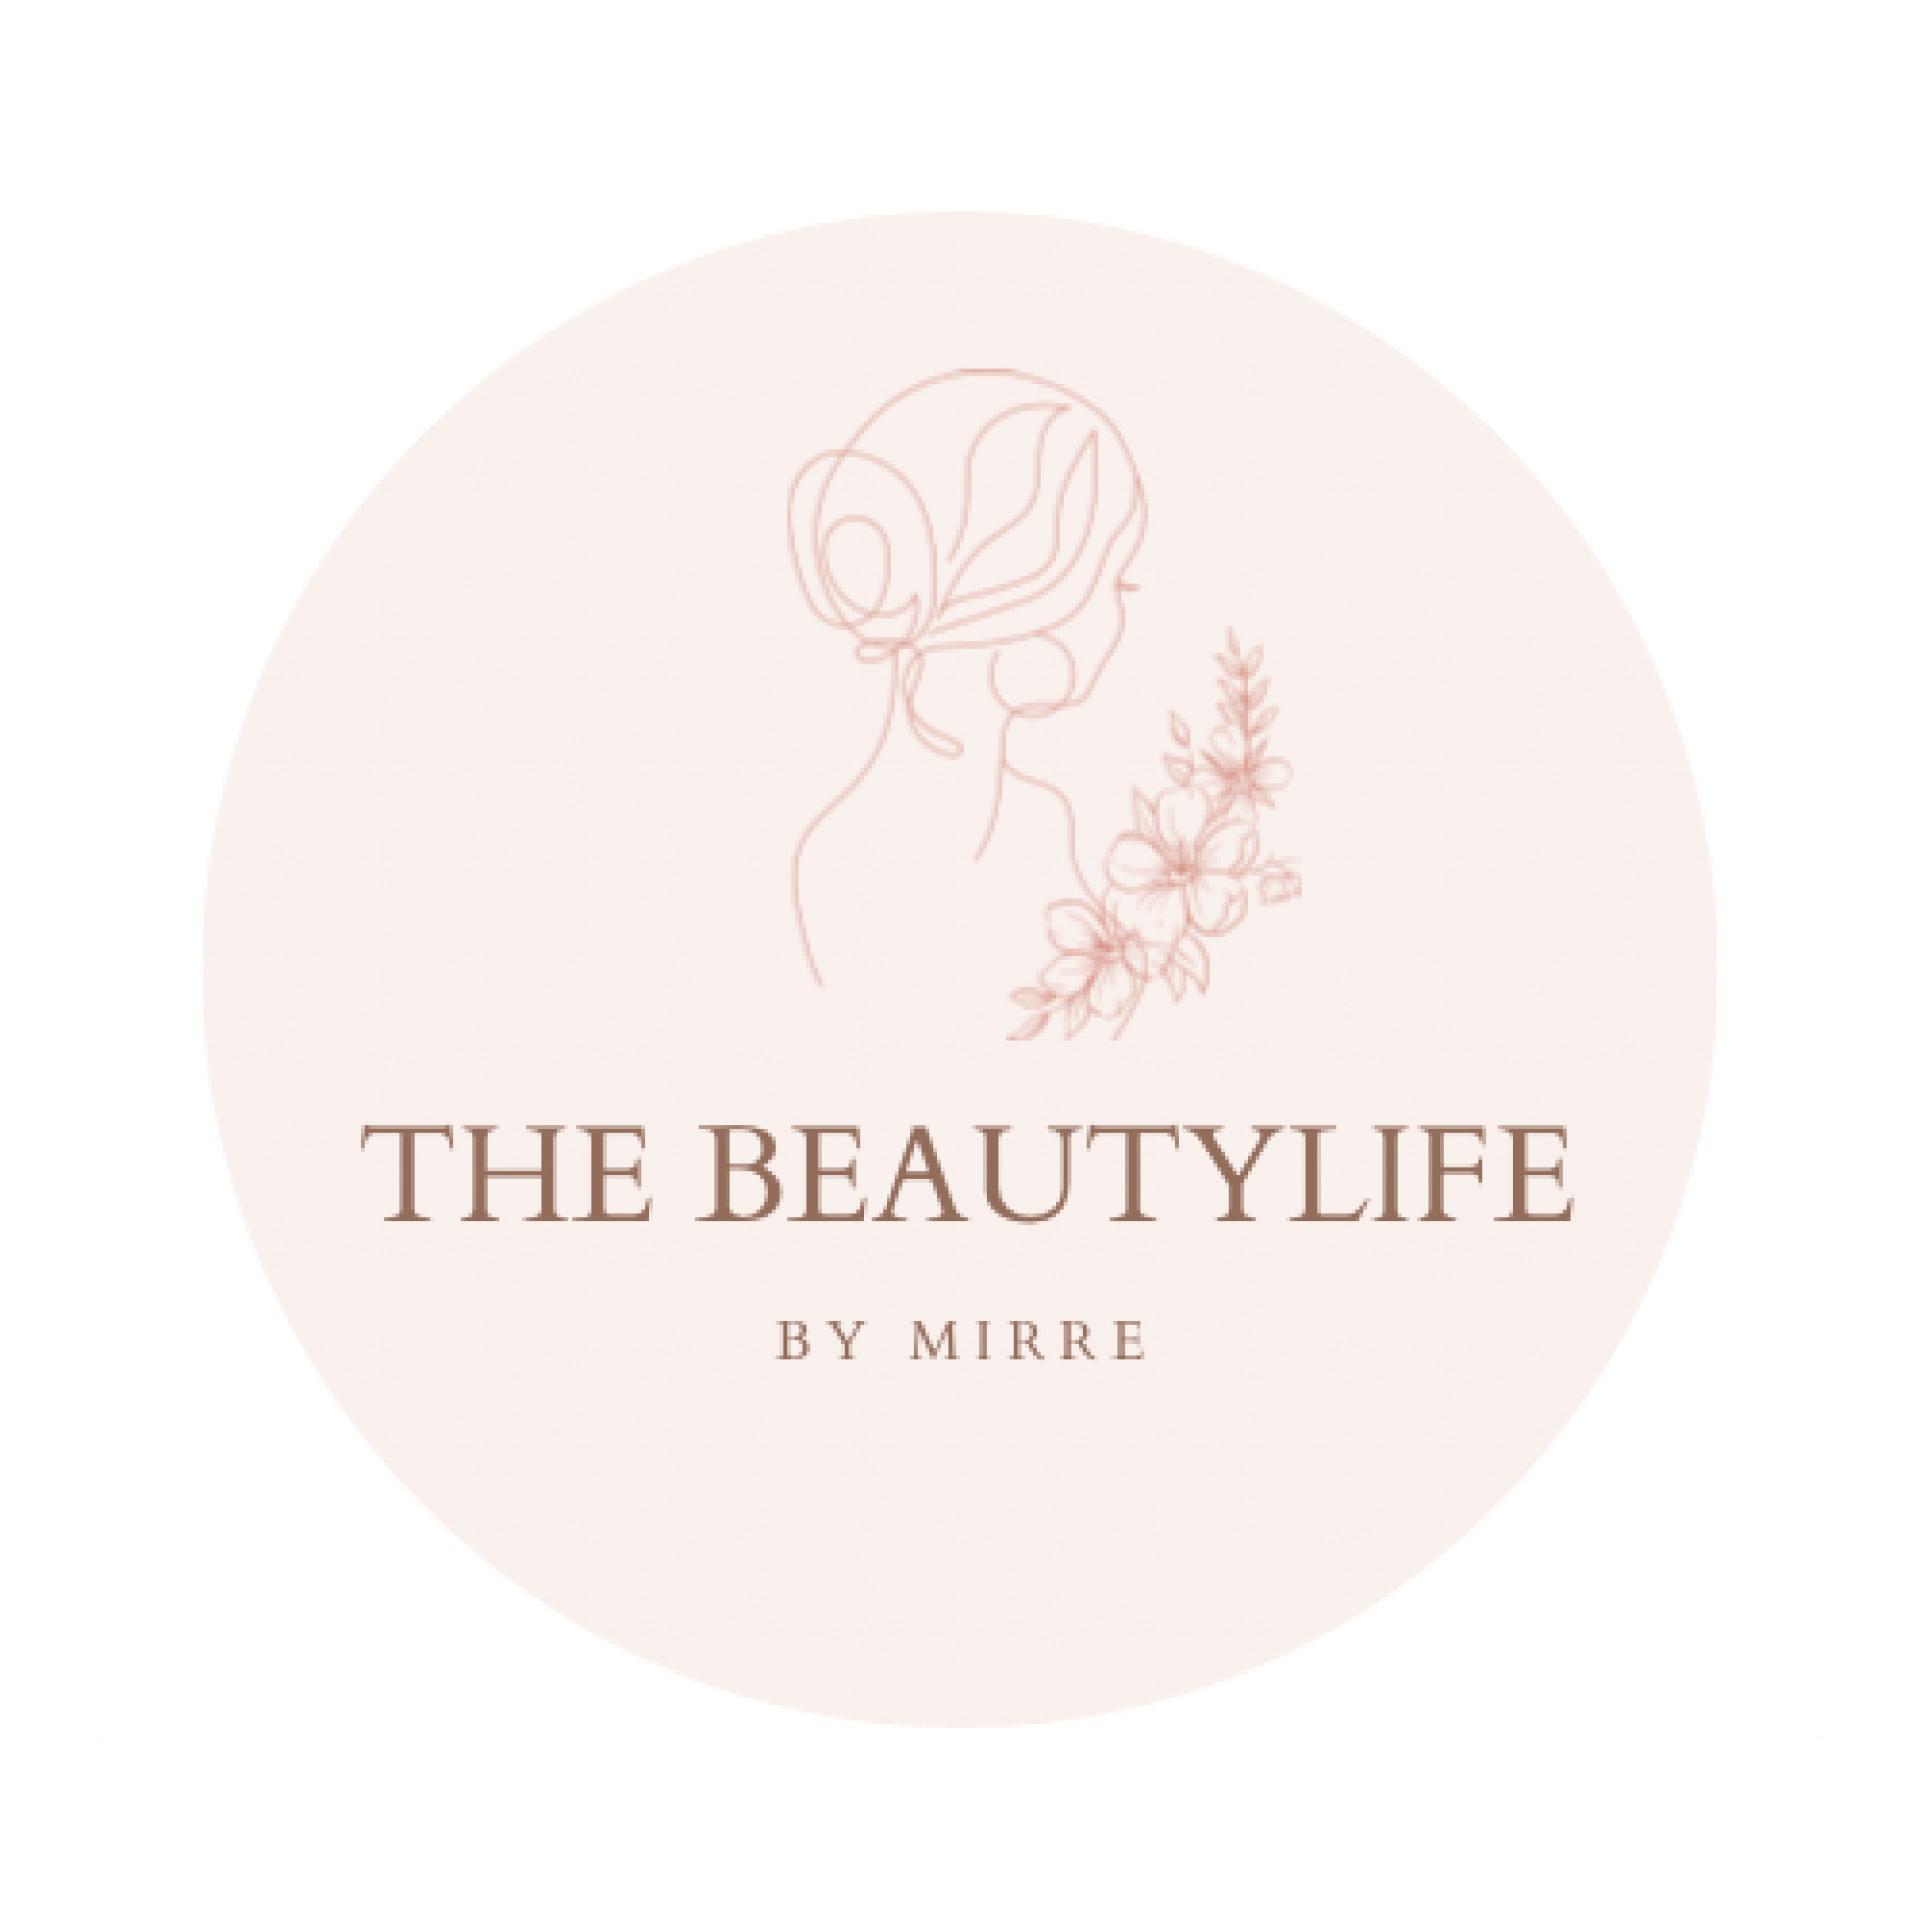 The beautylife by Mirre